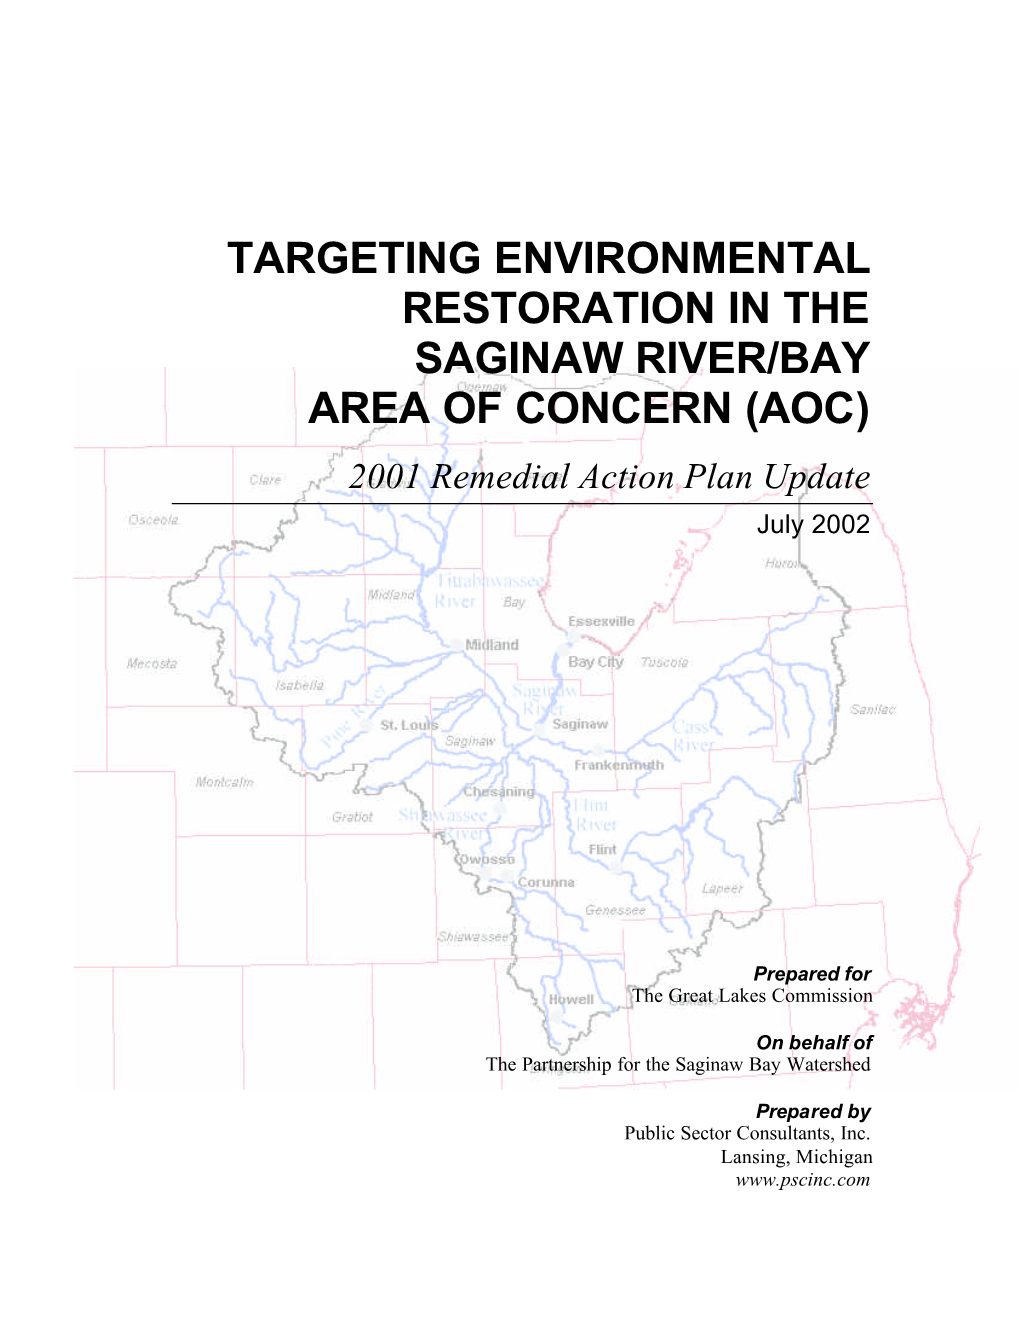 TARGETING ENVIRONMENTAL RESTORATION in the SAGINAW RIVER/BAY AREA of CONCERN (AOC) 2001 Remedial Action Plan Update July 2002